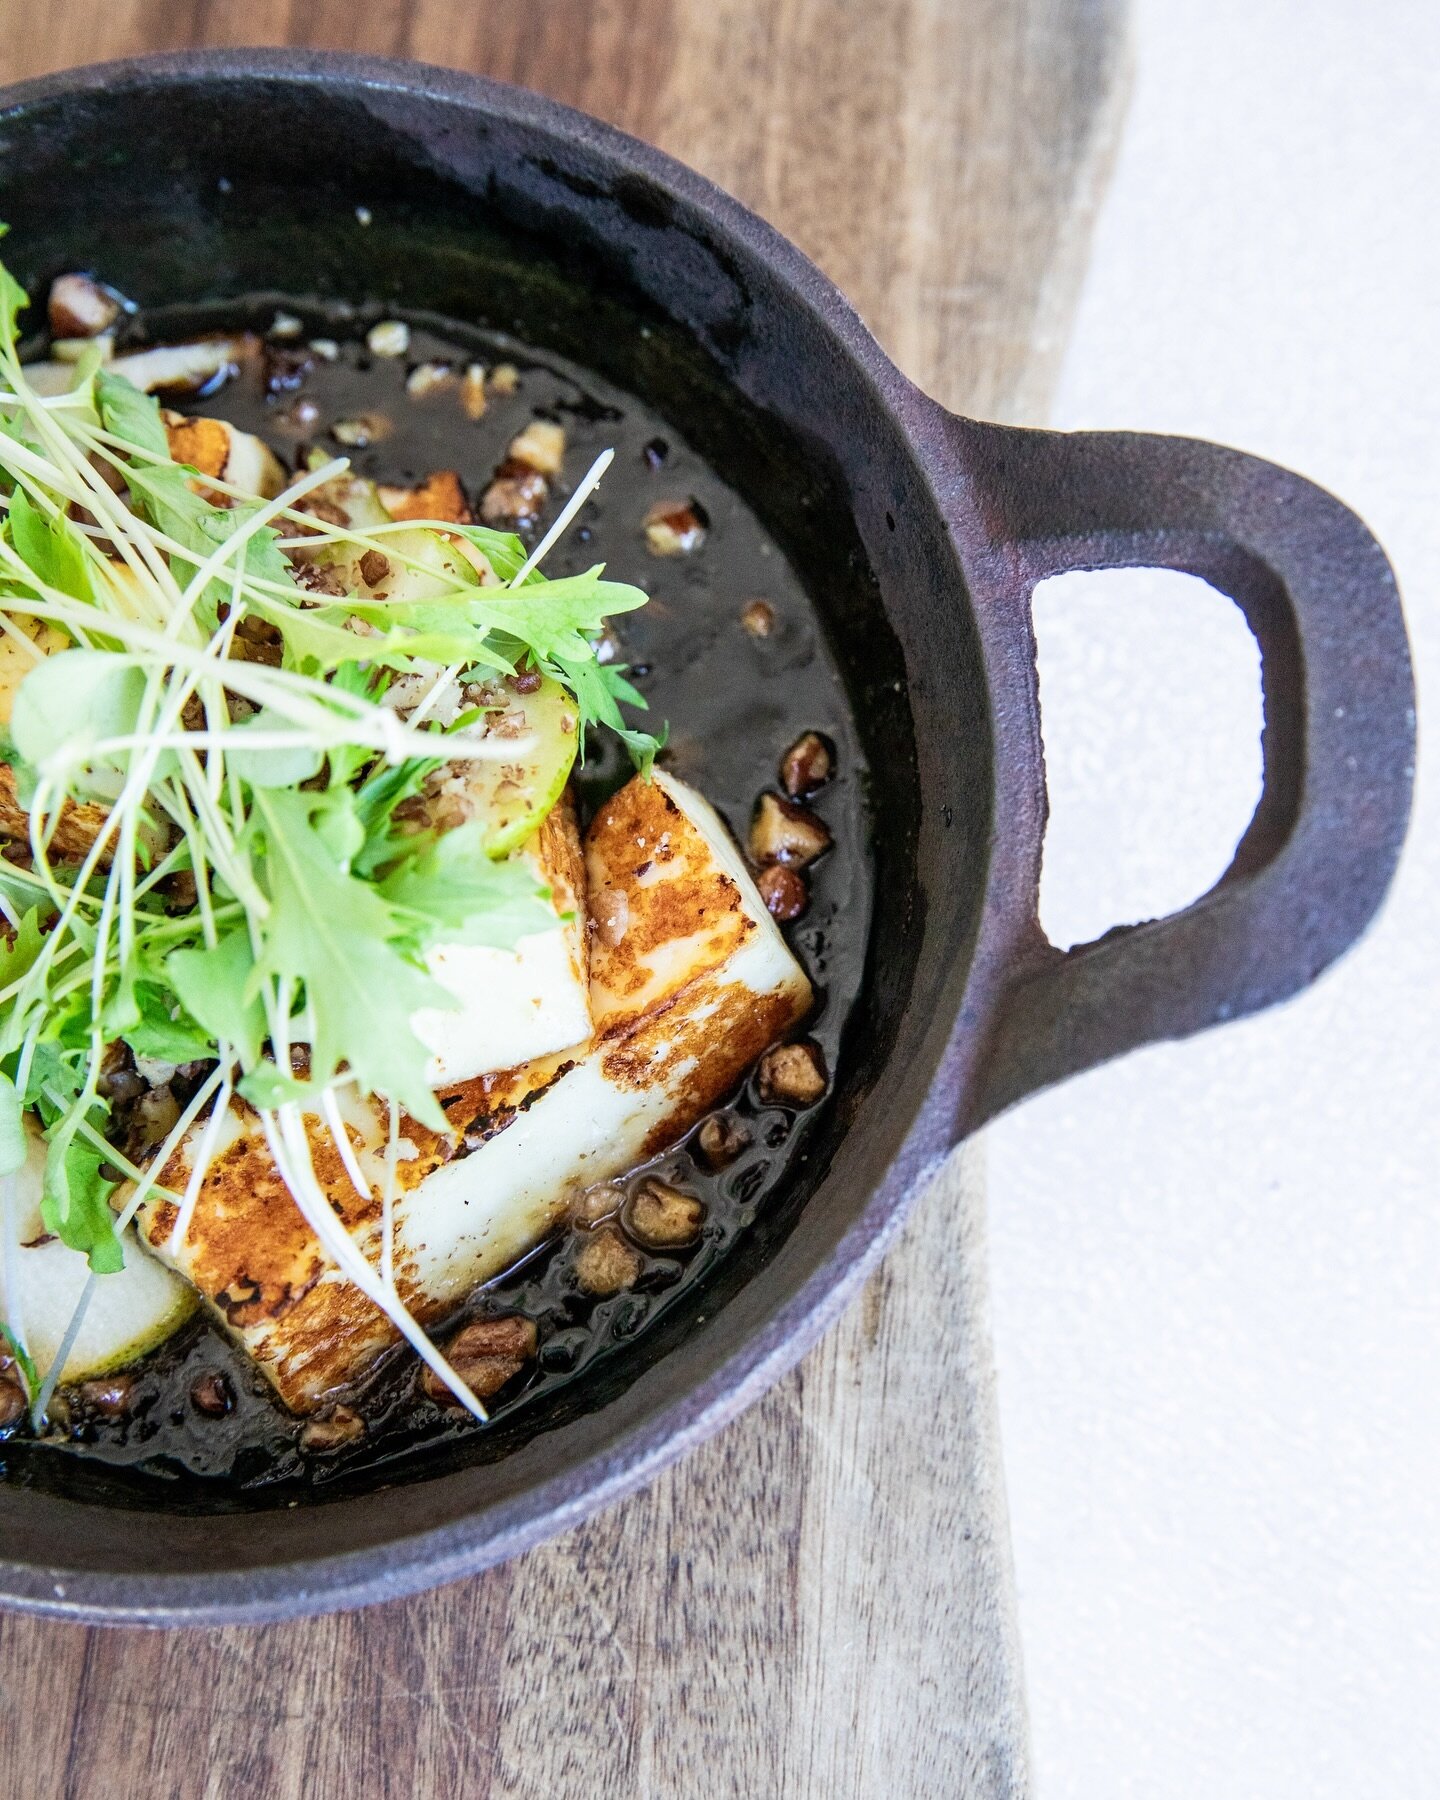 Our Haloumi has been a staple on the menu and a guest favorite for some time. It&rsquo;s served sizzling on a cast iron dish with onion jam, smoked honey, pecans and green mizuna. 

One guest said, &ldquo;the haloumi cheese dish was my favorite.  Wow